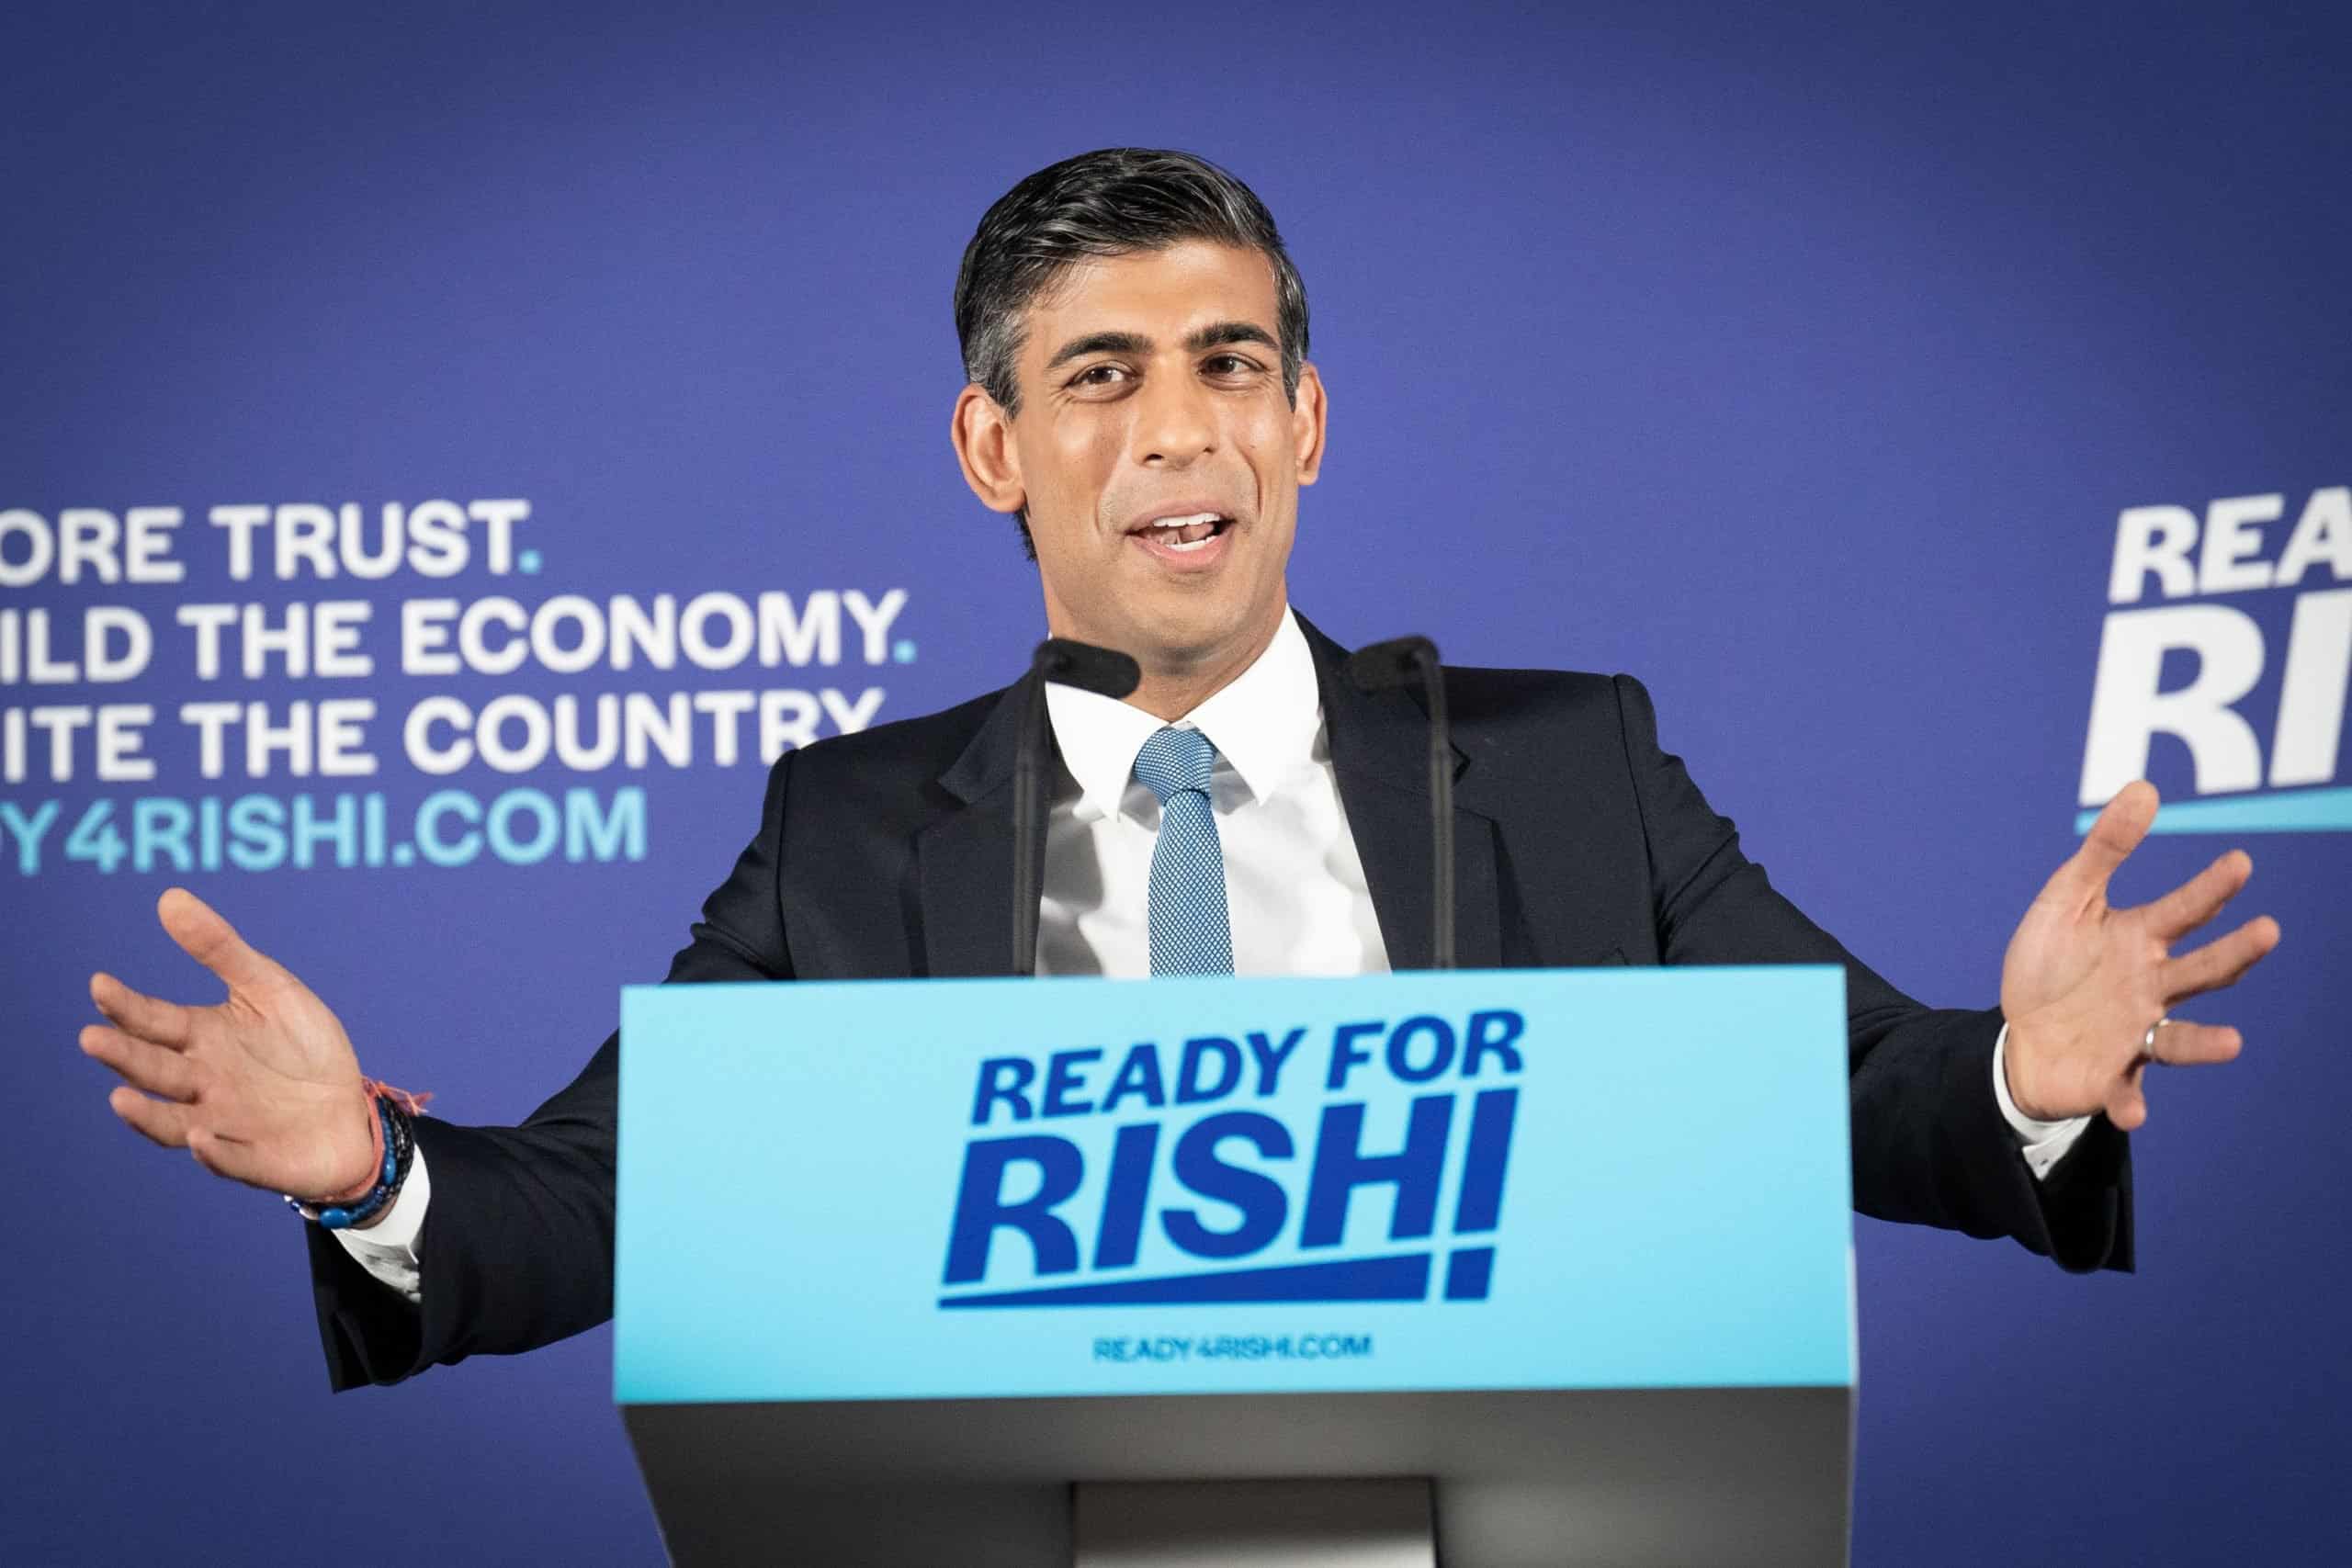 Watch: Rishi Sunak’s clip claiming Brexit has been a great success is debunked in viral video